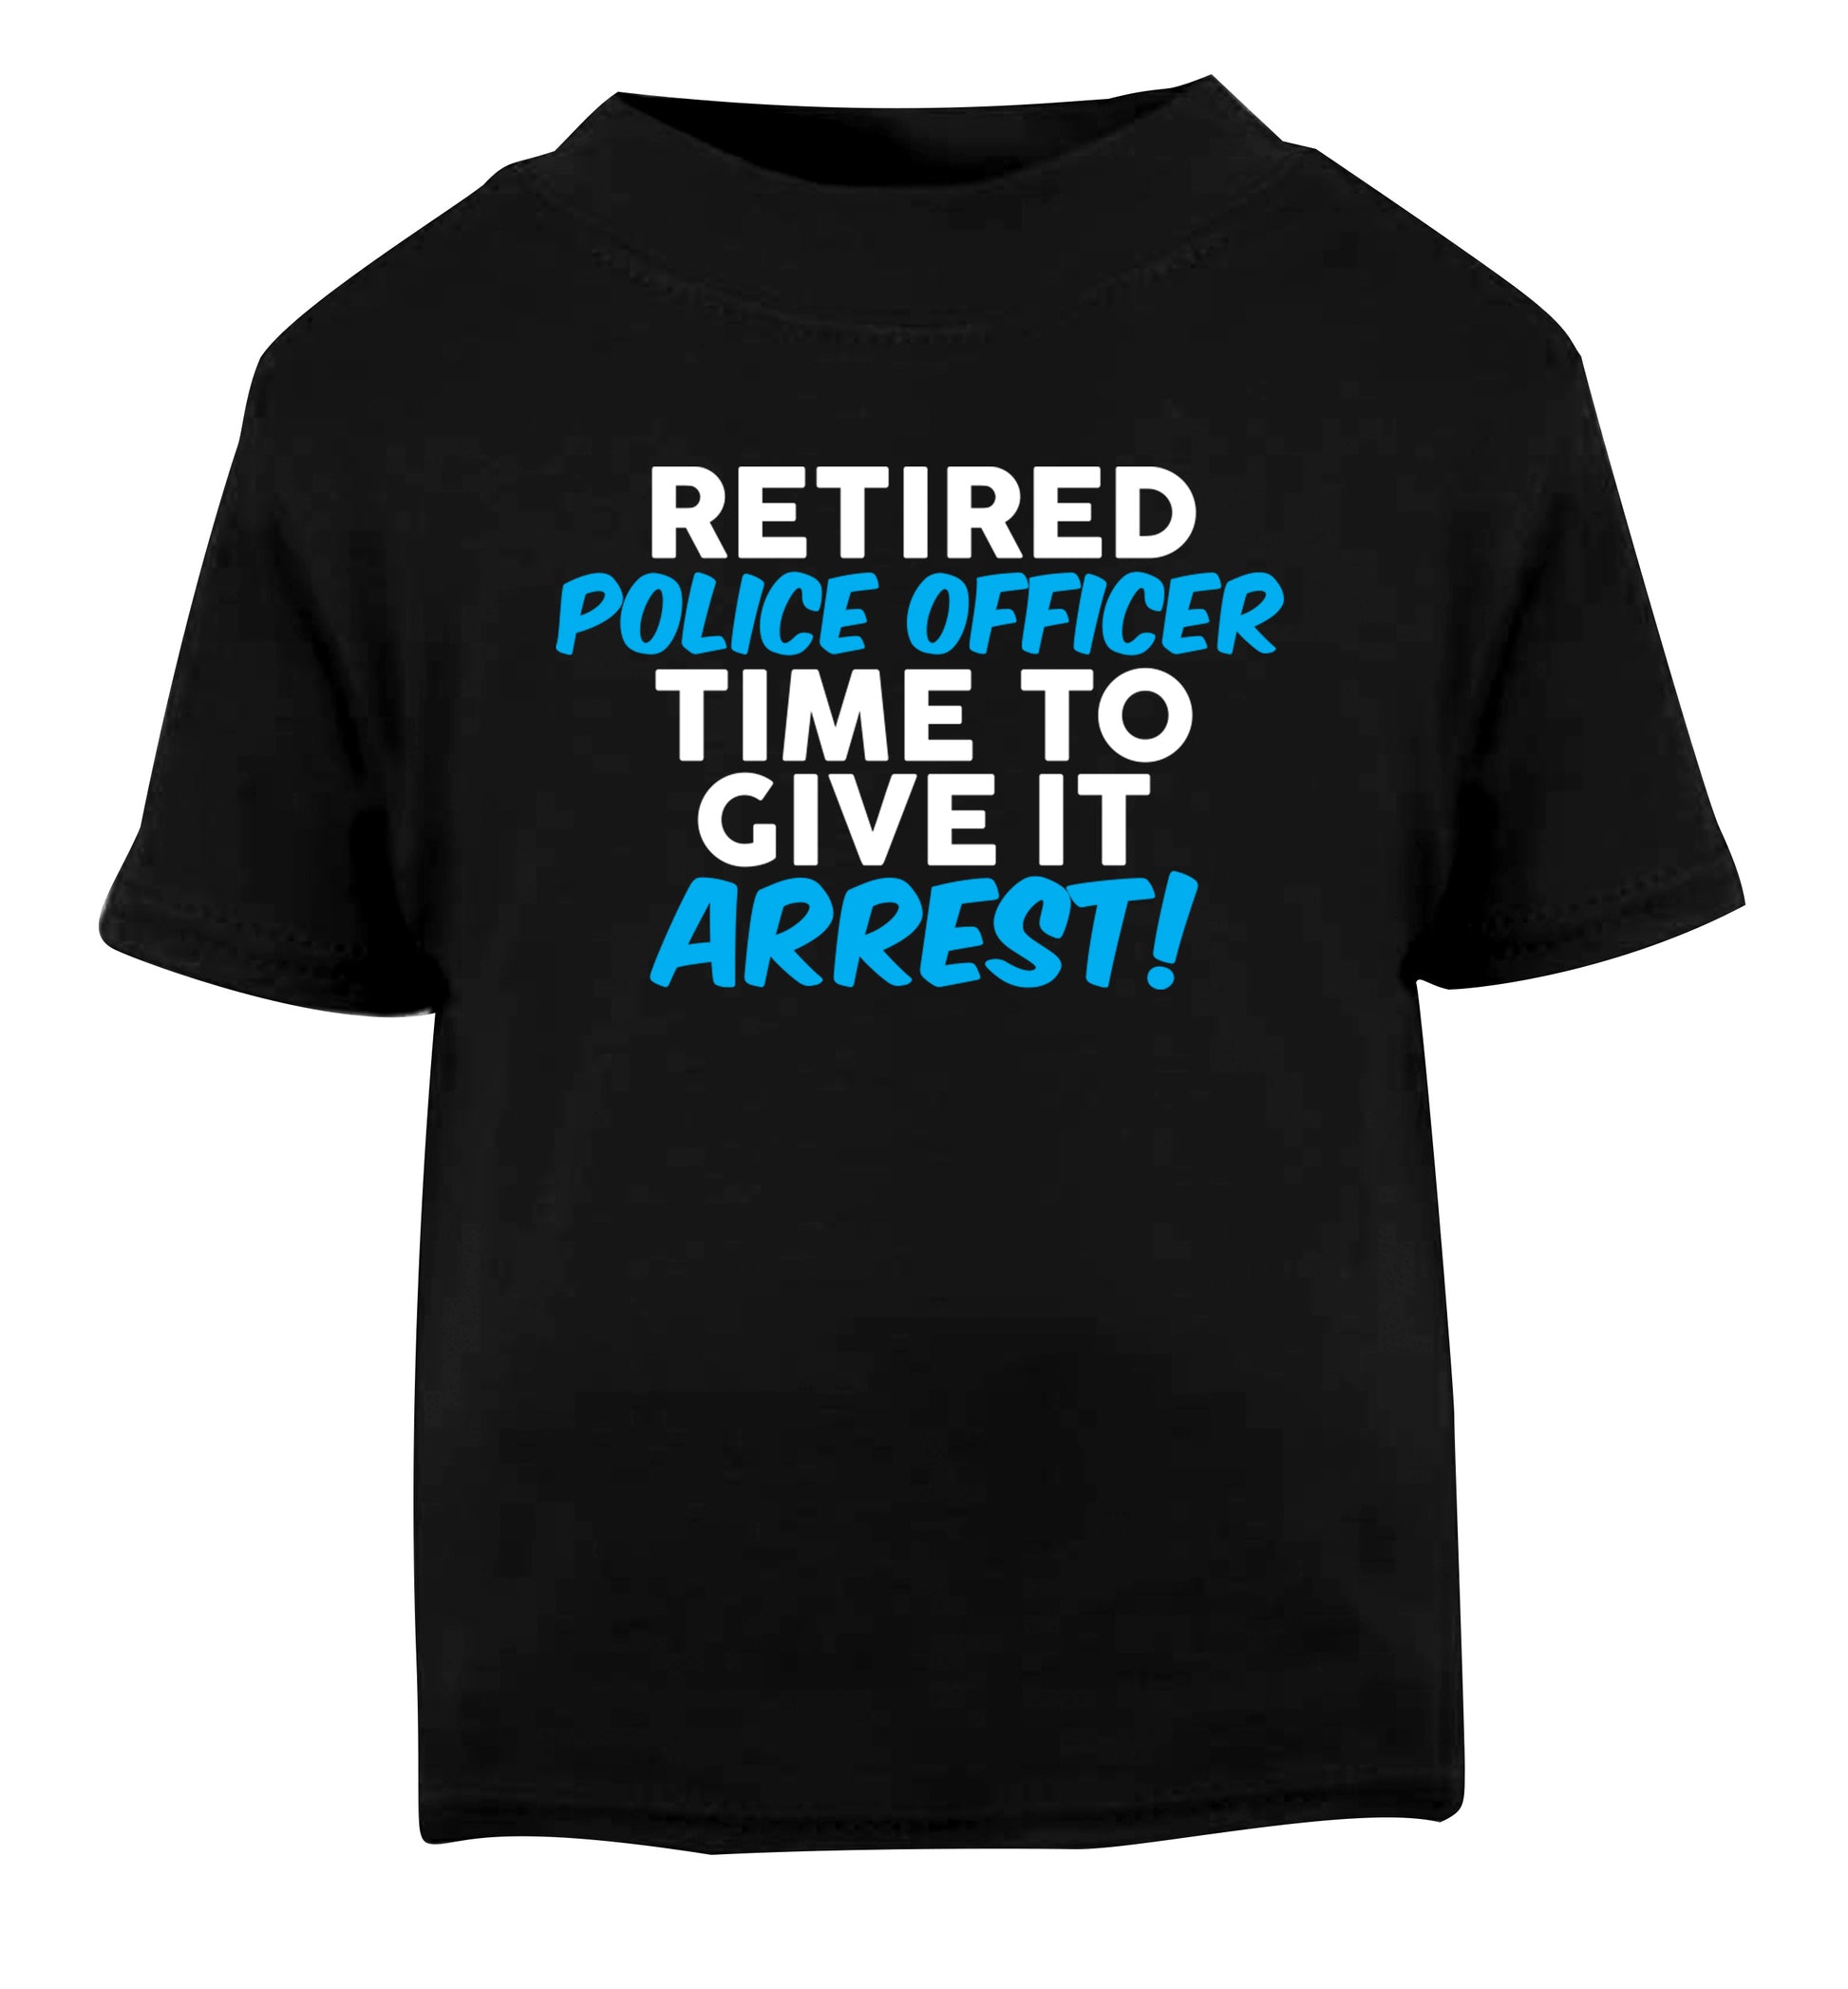 Retired police officer time to give it arrest Black Baby Toddler Tshirt 2 years